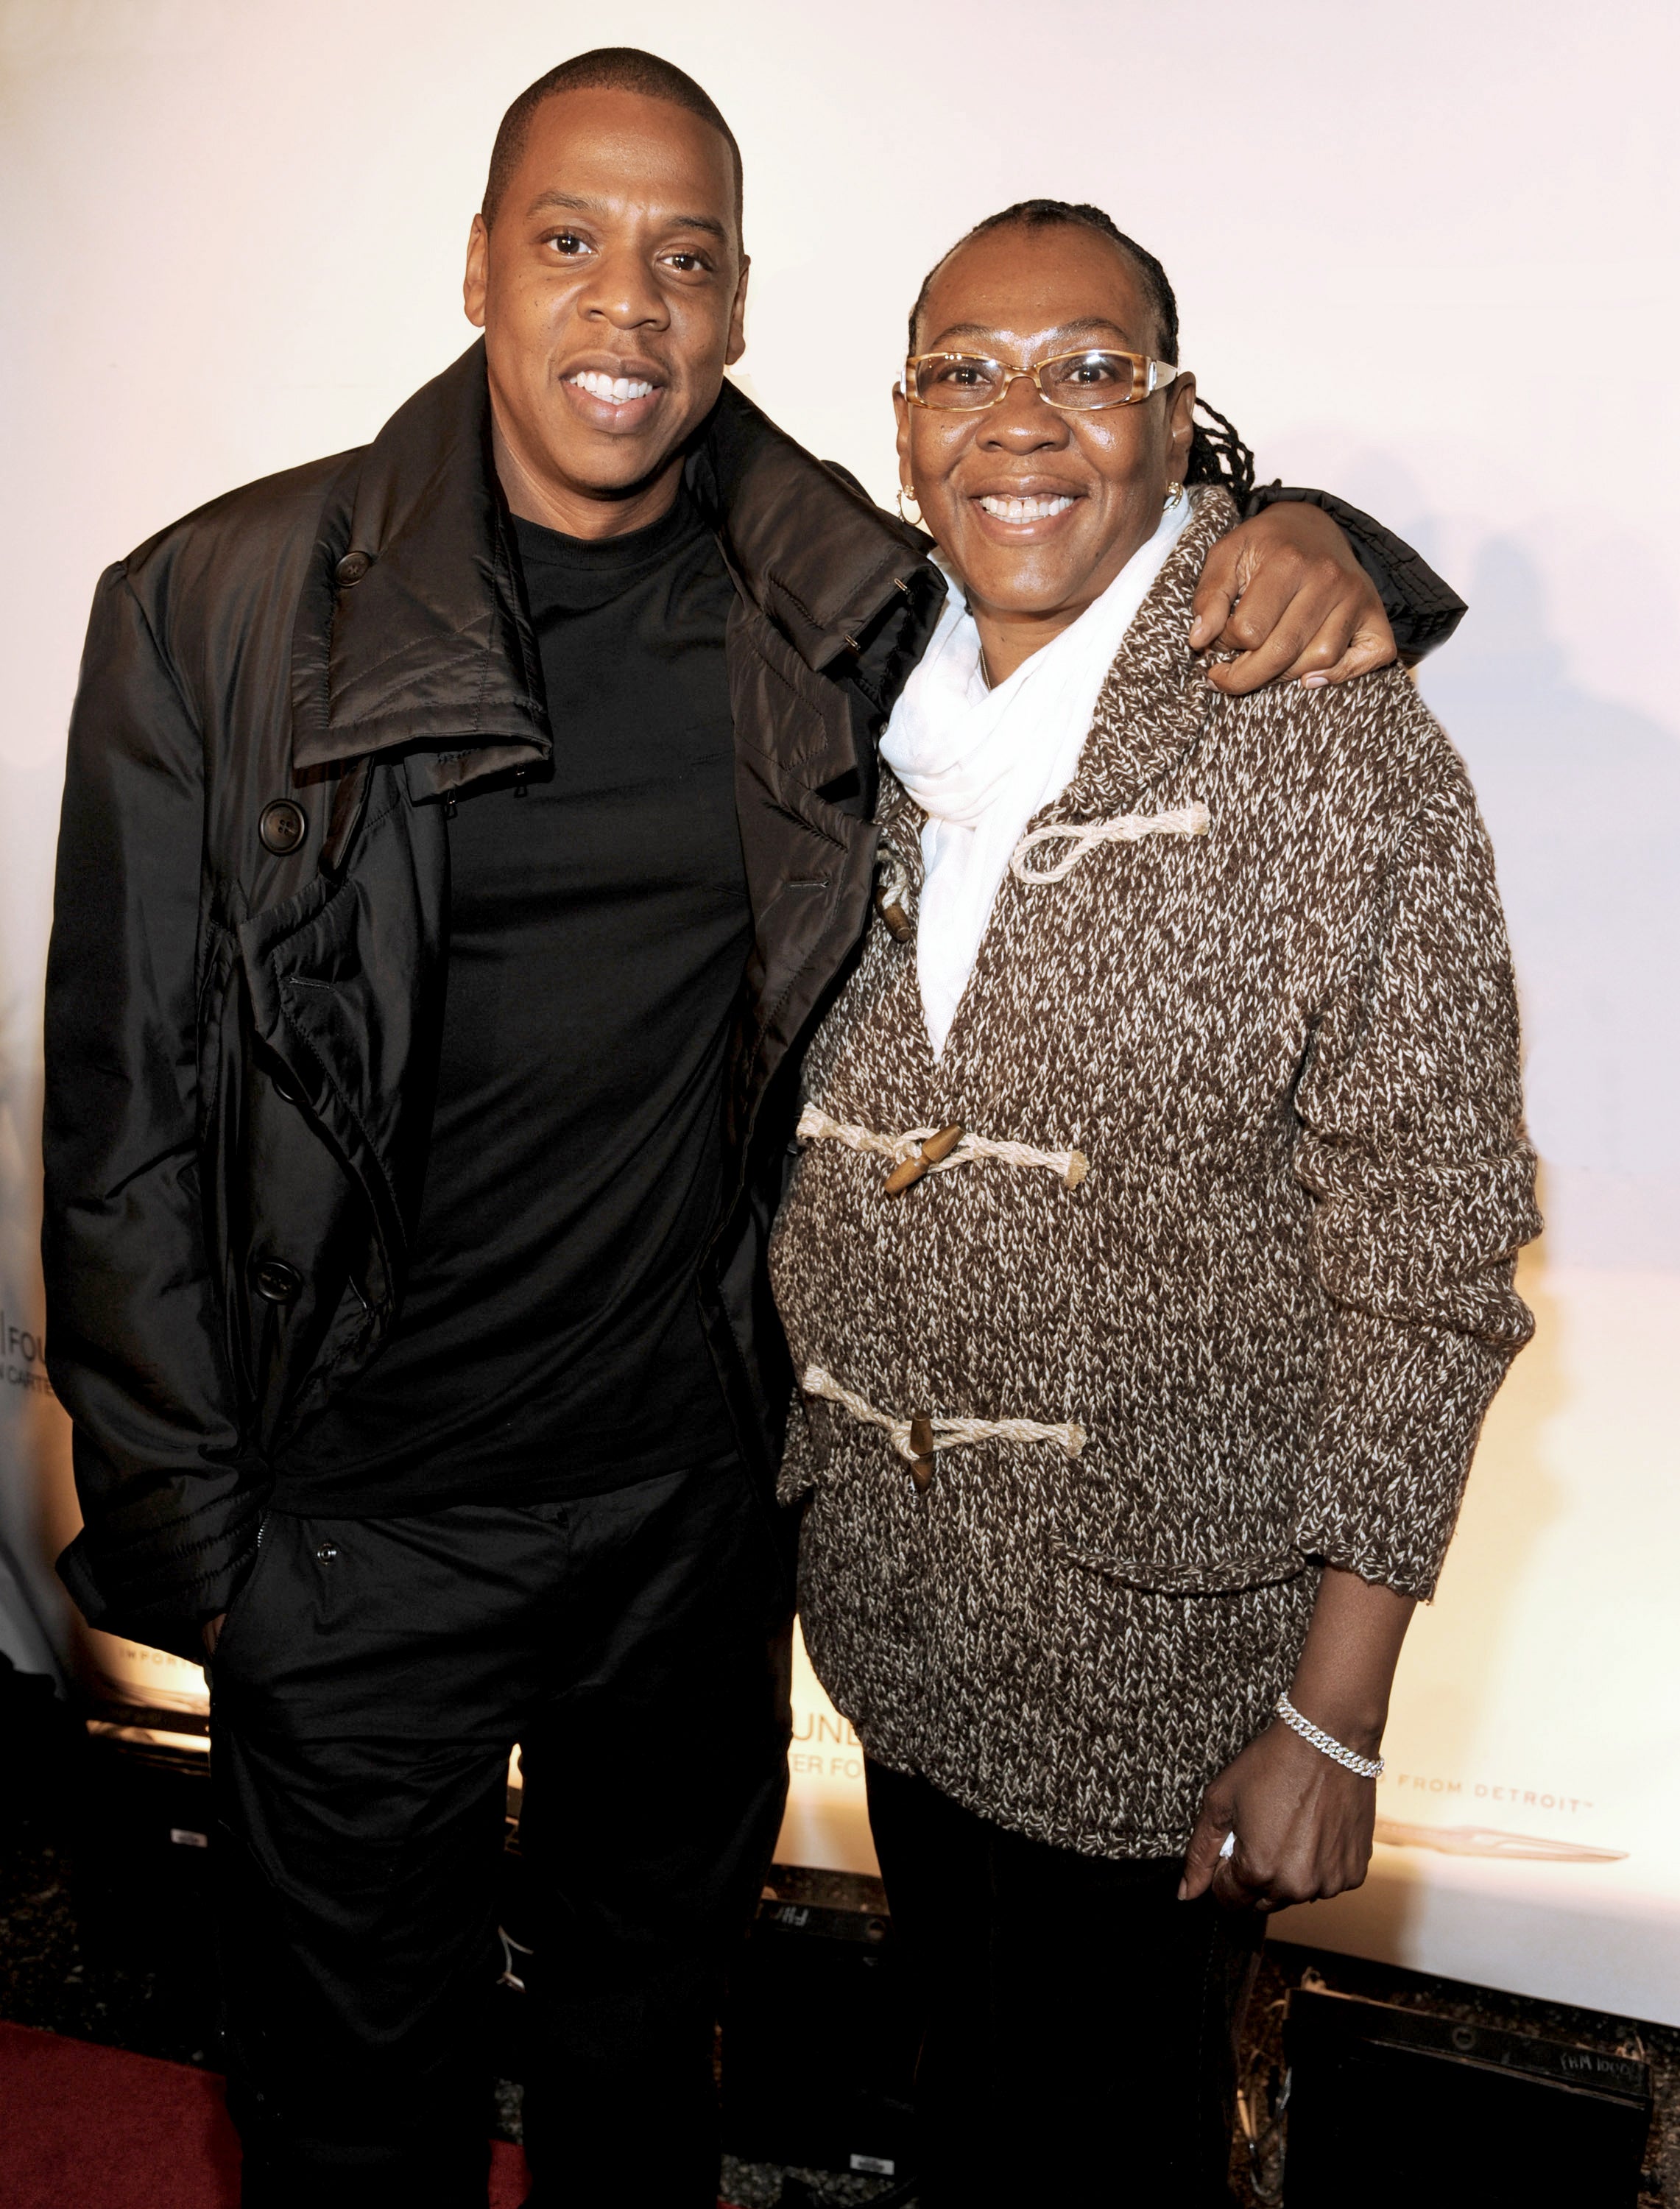 Jay-Z’s Mother Opens Up About Coming Out Publicly On 4:44: ‘I Did It For Me’
